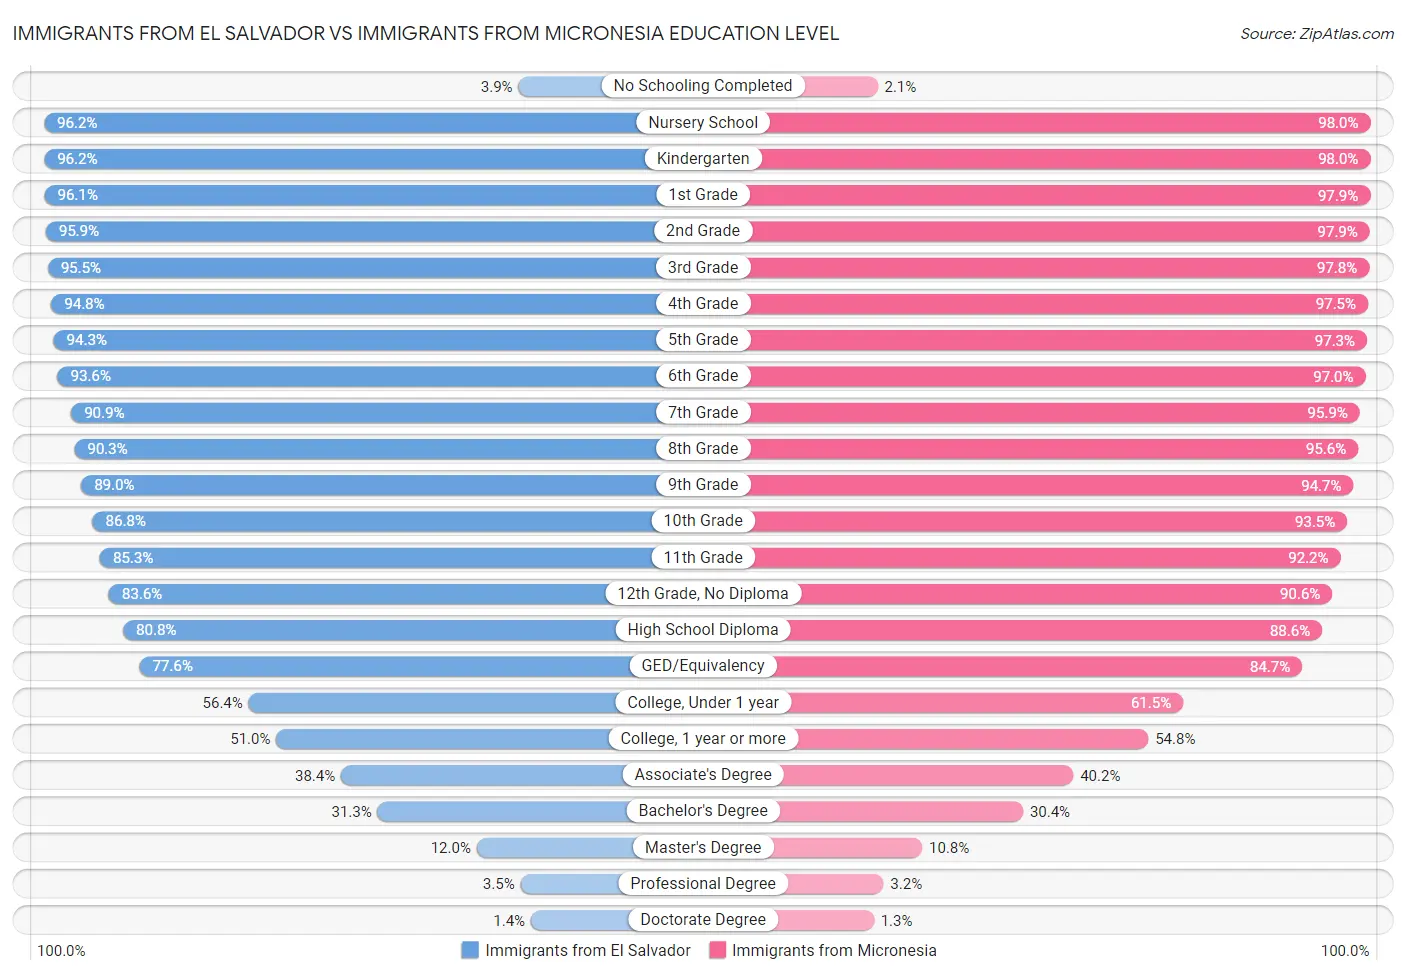 Immigrants from El Salvador vs Immigrants from Micronesia Education Level